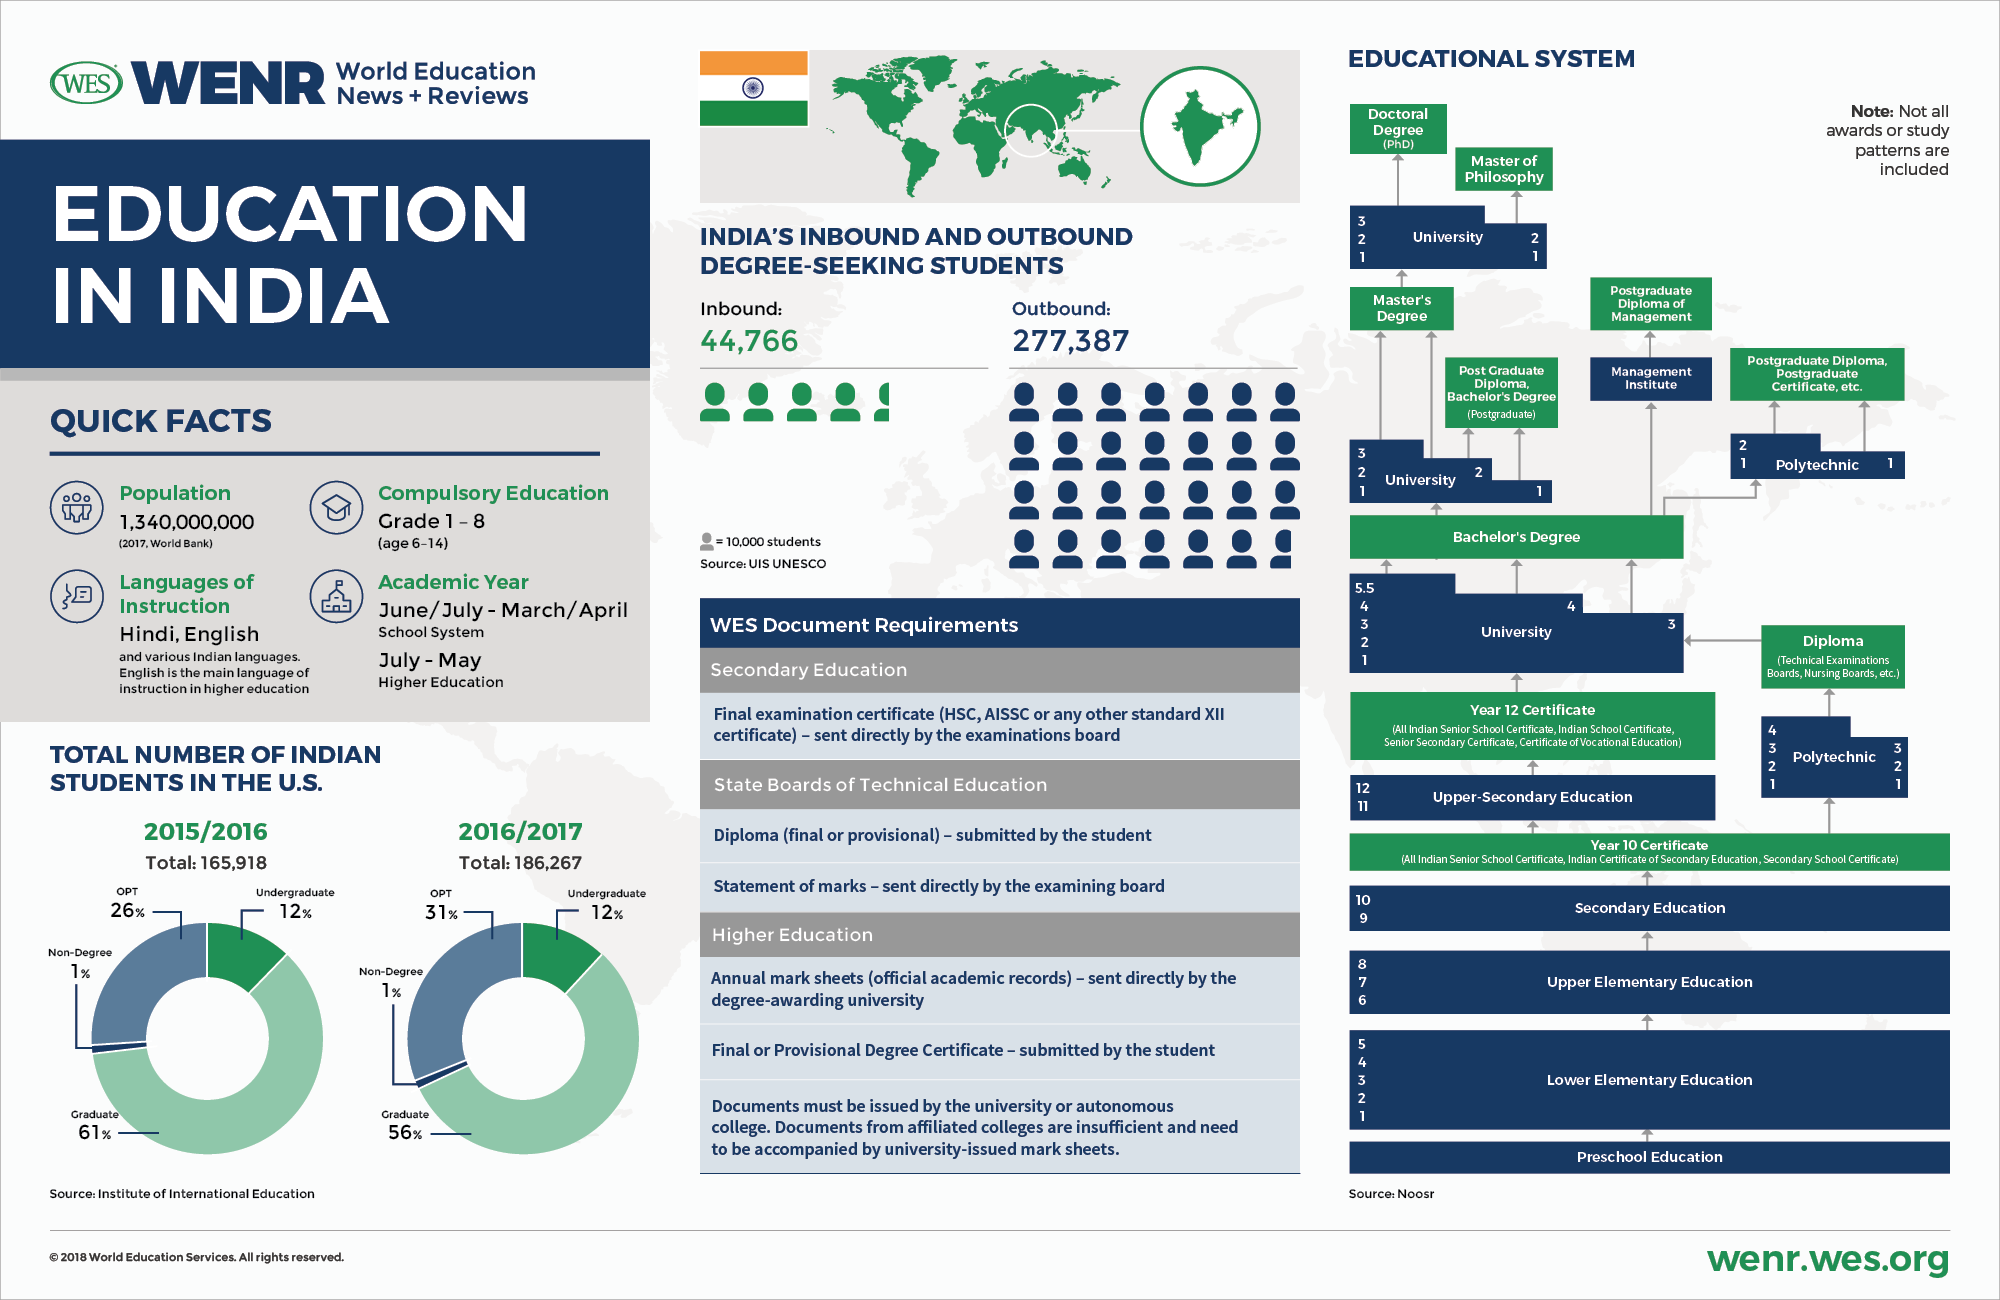 An infographic with fast facts on India's educational system and international student mobility